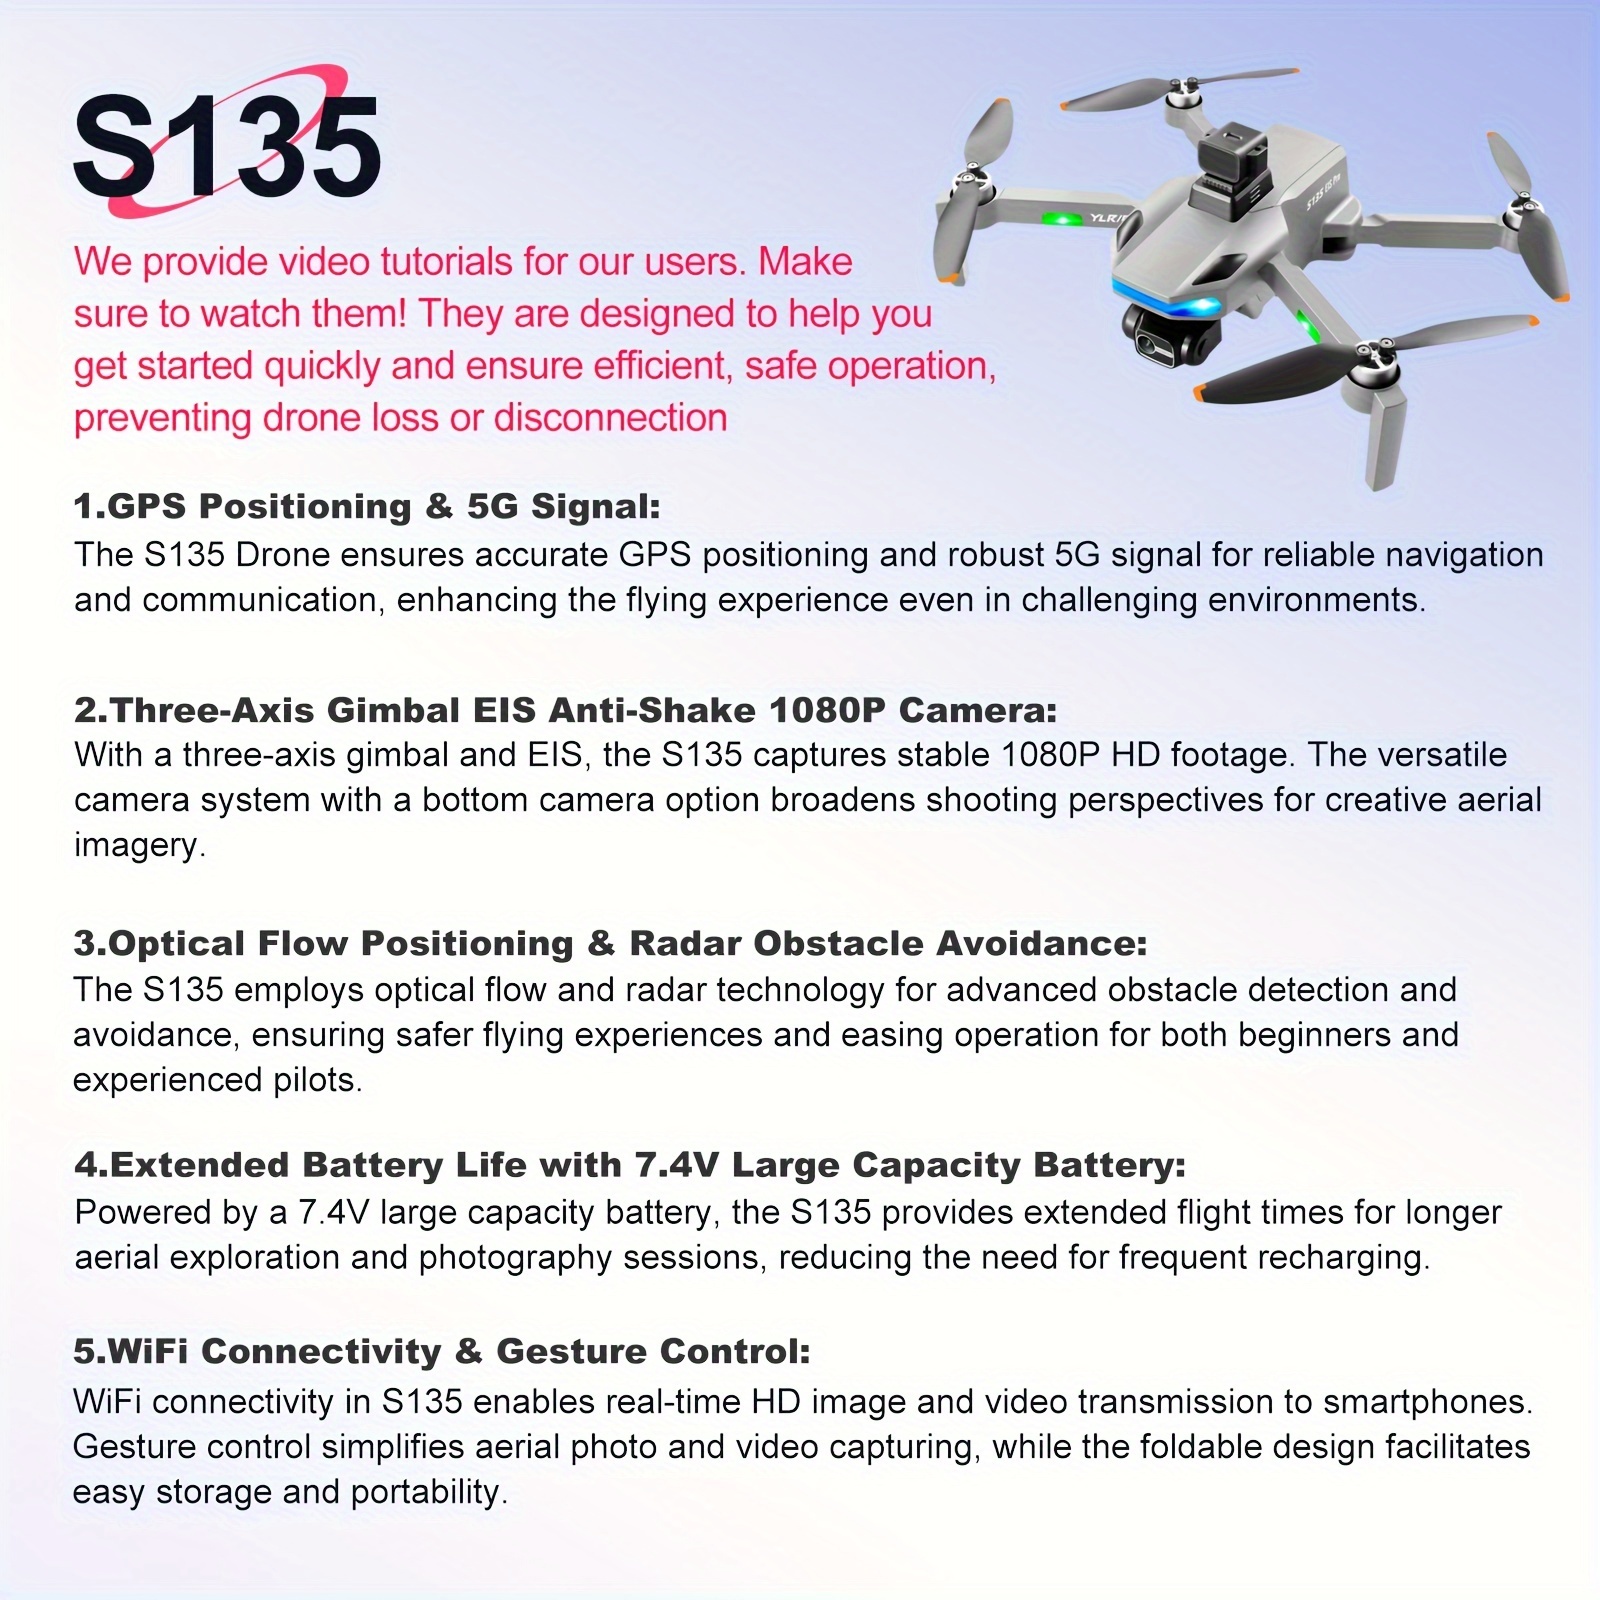 new s135 professional rc drone precise gps positioning powerful brushless motor with 1080p electric gimbal camera on three axis lcd display real time 5g signal transmission perfect toy gift teenager stuff uav quadcopter details 0